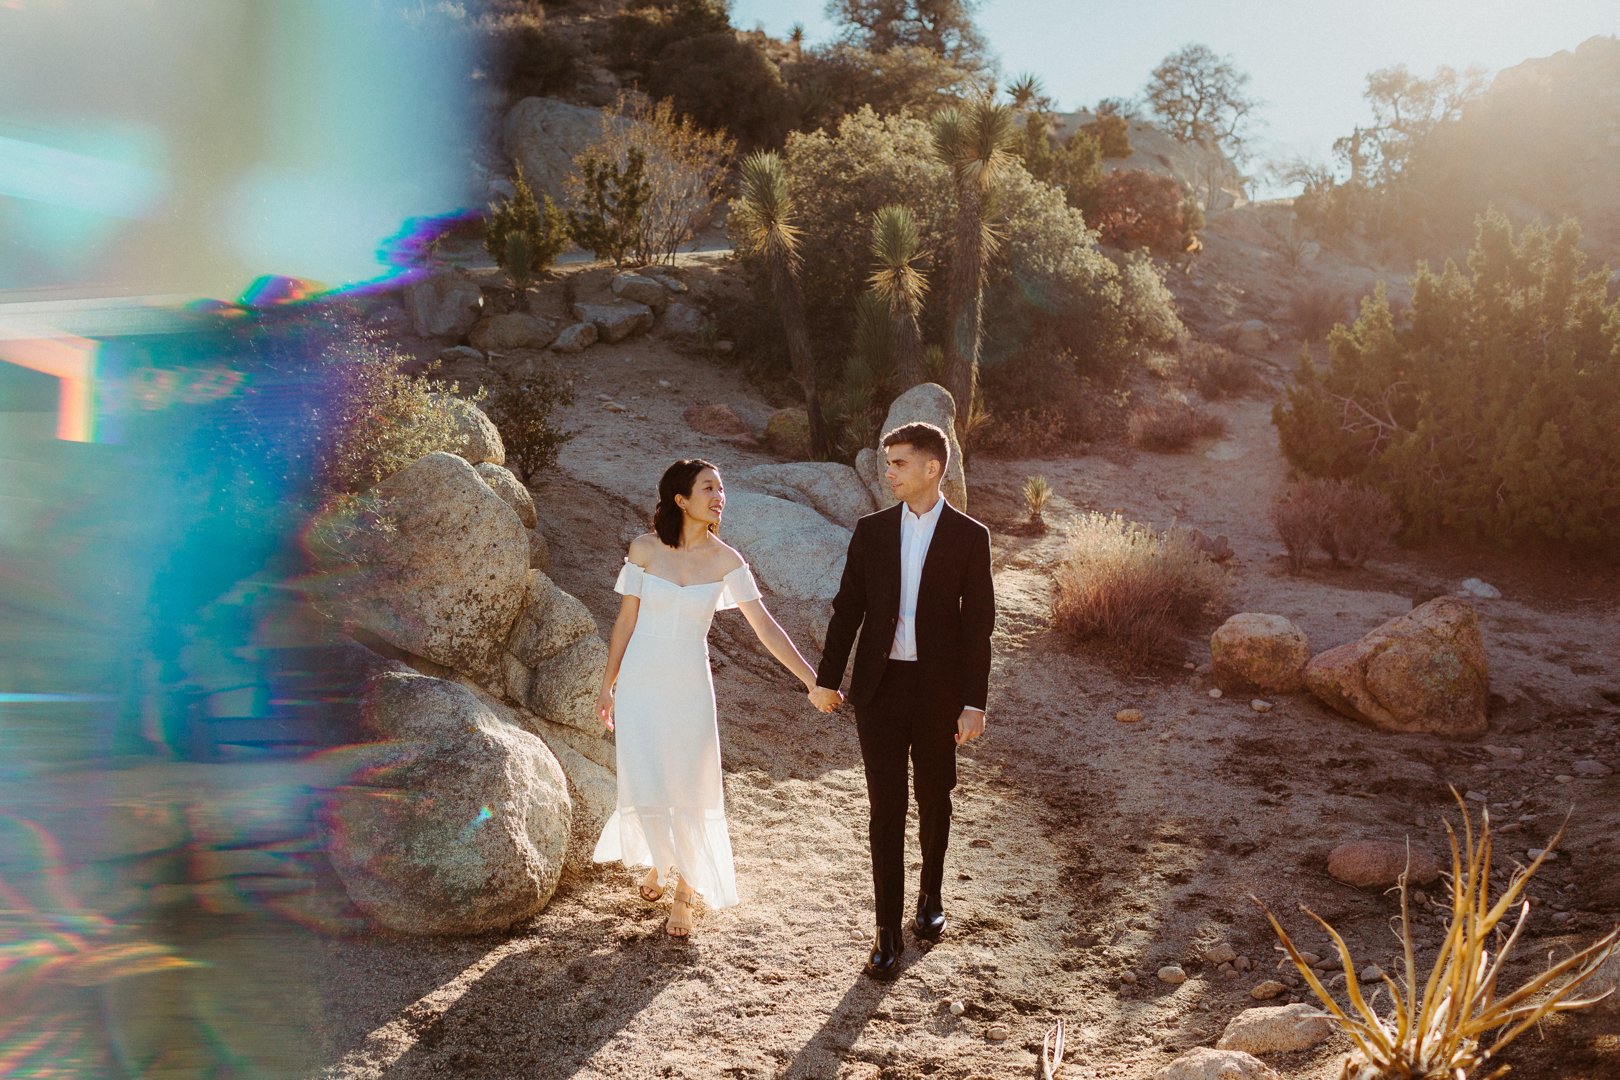 the hendrys, photographers in LA, come out to joshua tree to shoot artsy and intimate wedding photos